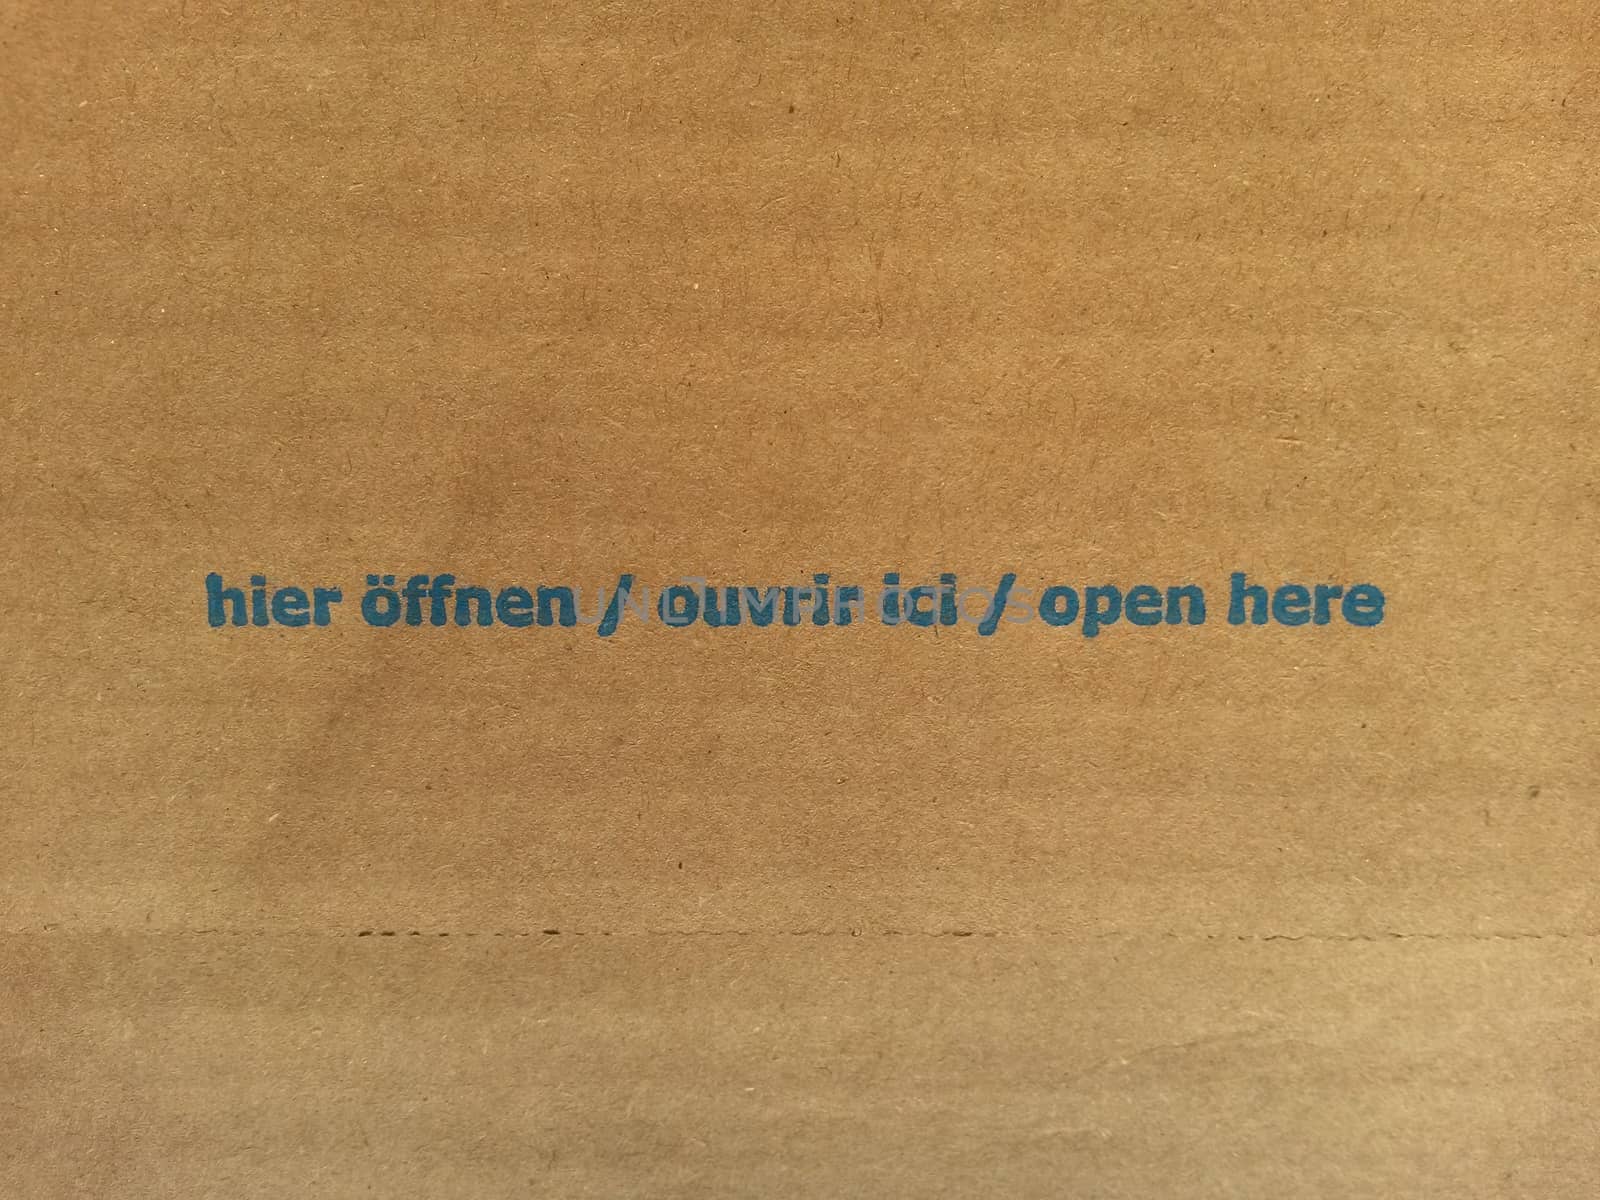 Hier offnen - Ouvrir ici - Open here printed over corrugated cardboard